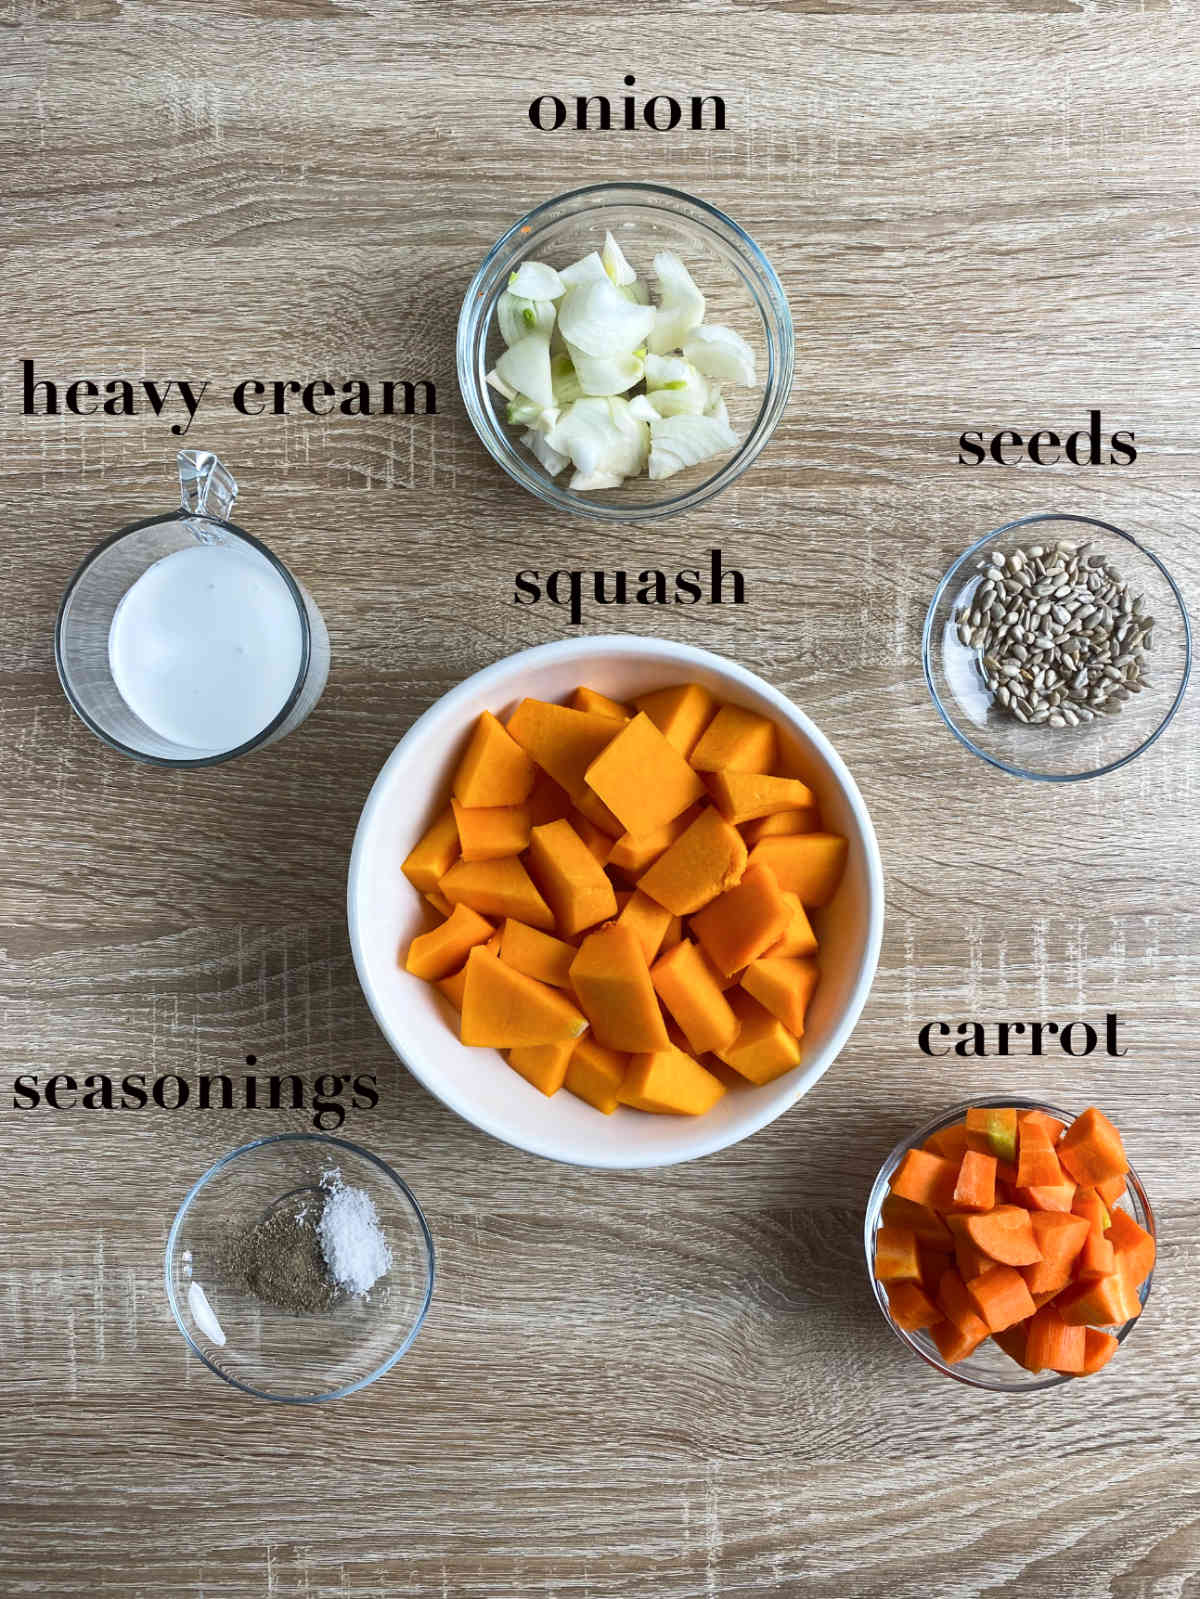 Six bowls with different ingredients on a table: heavy cream, onion, seeds, squash, carrot and seasonings. 